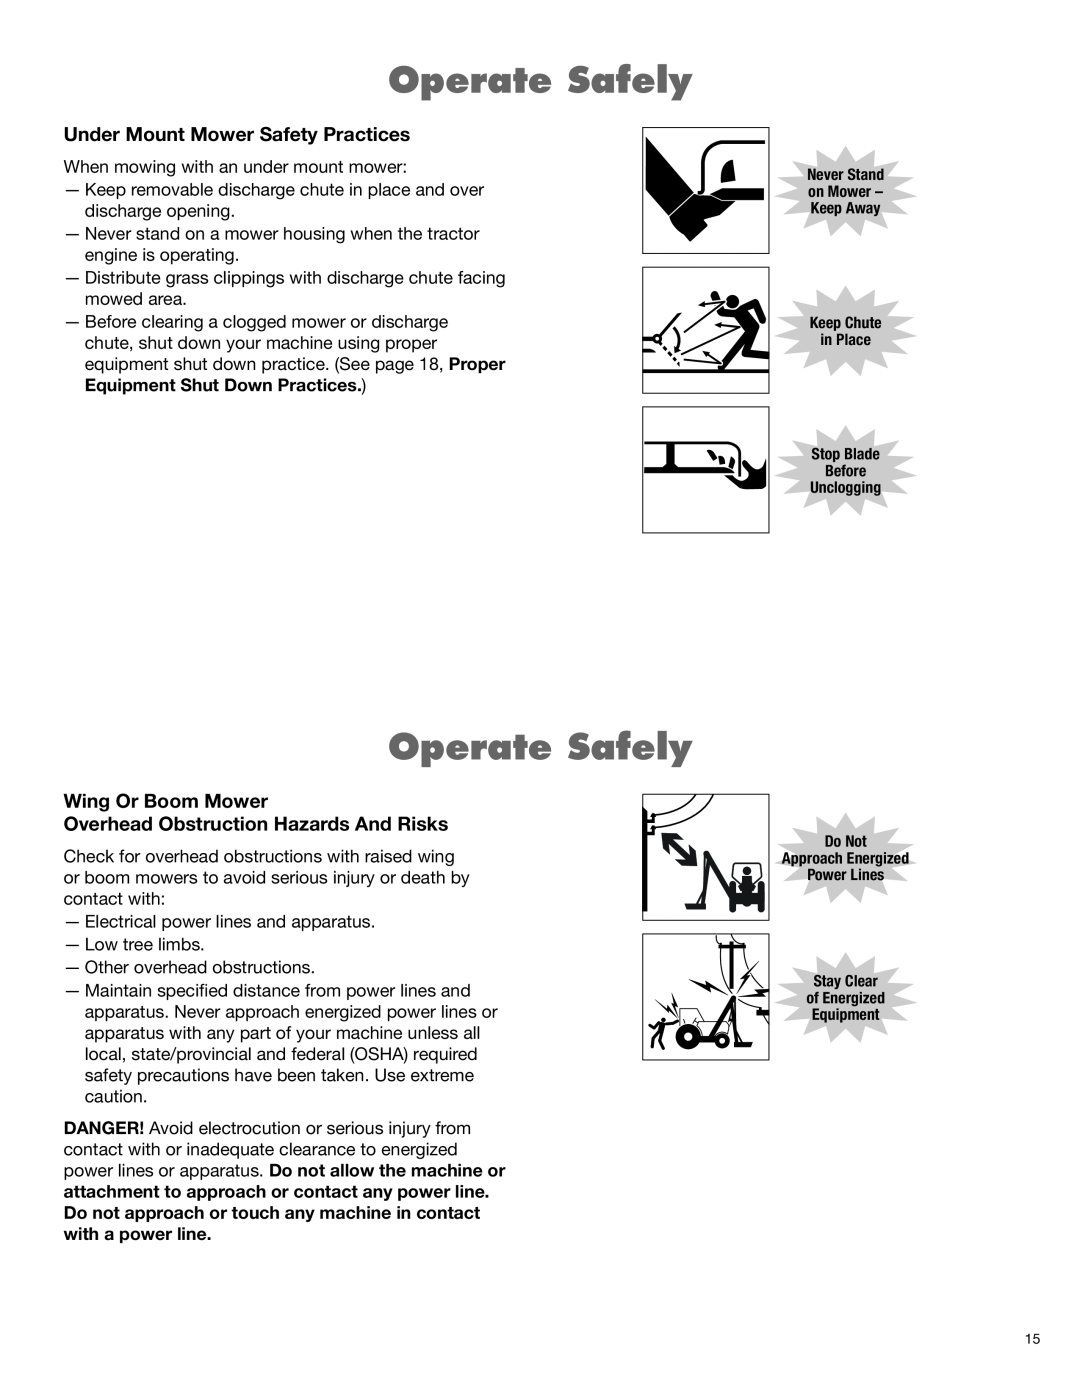 Rhino Mounts 148 manual Operate Safely, Under Mount Mower Safety Practices 